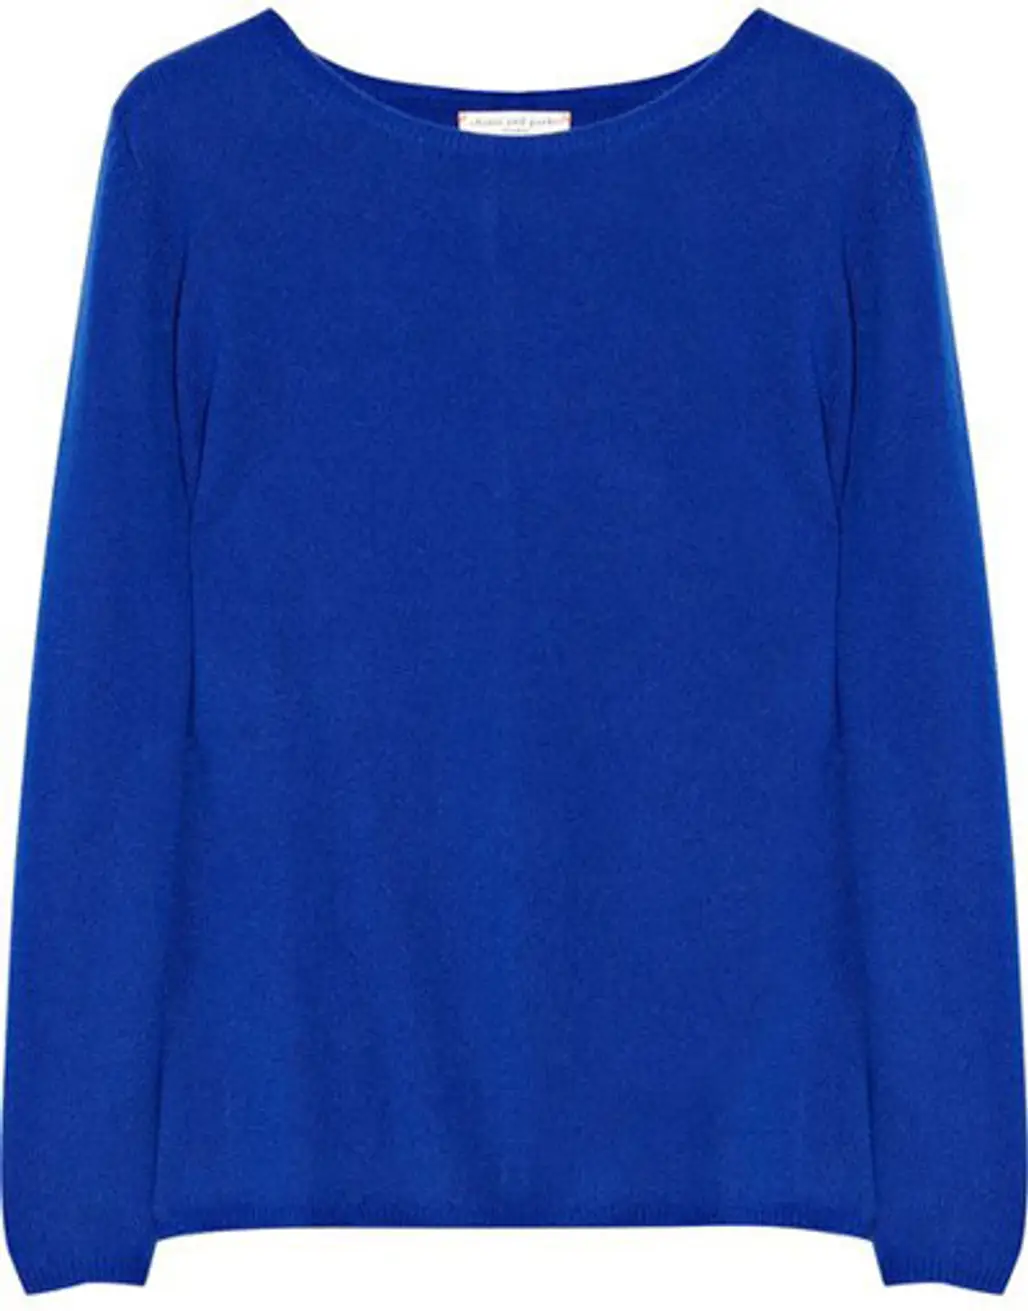 Chinti and Parker Contrast-Elbow Cashmere Sweater